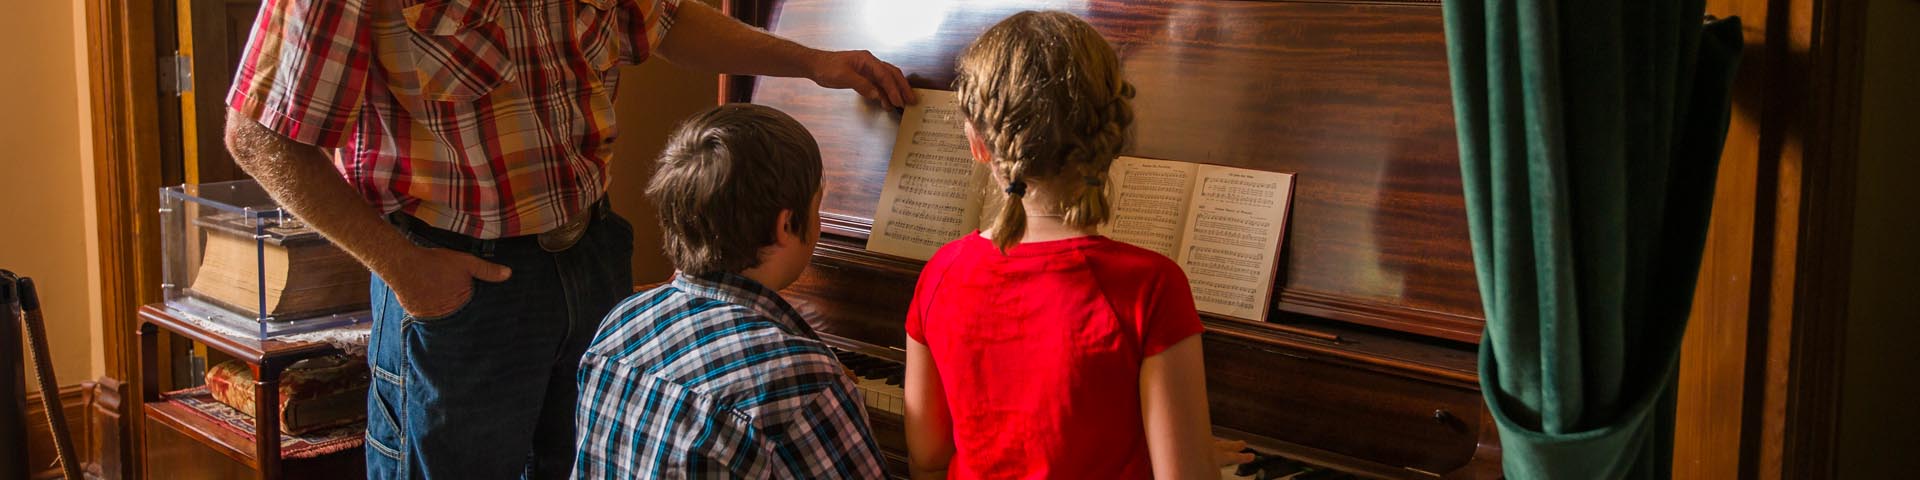  A family is learning about the piano music played in the stone house at Motherwell Homestead